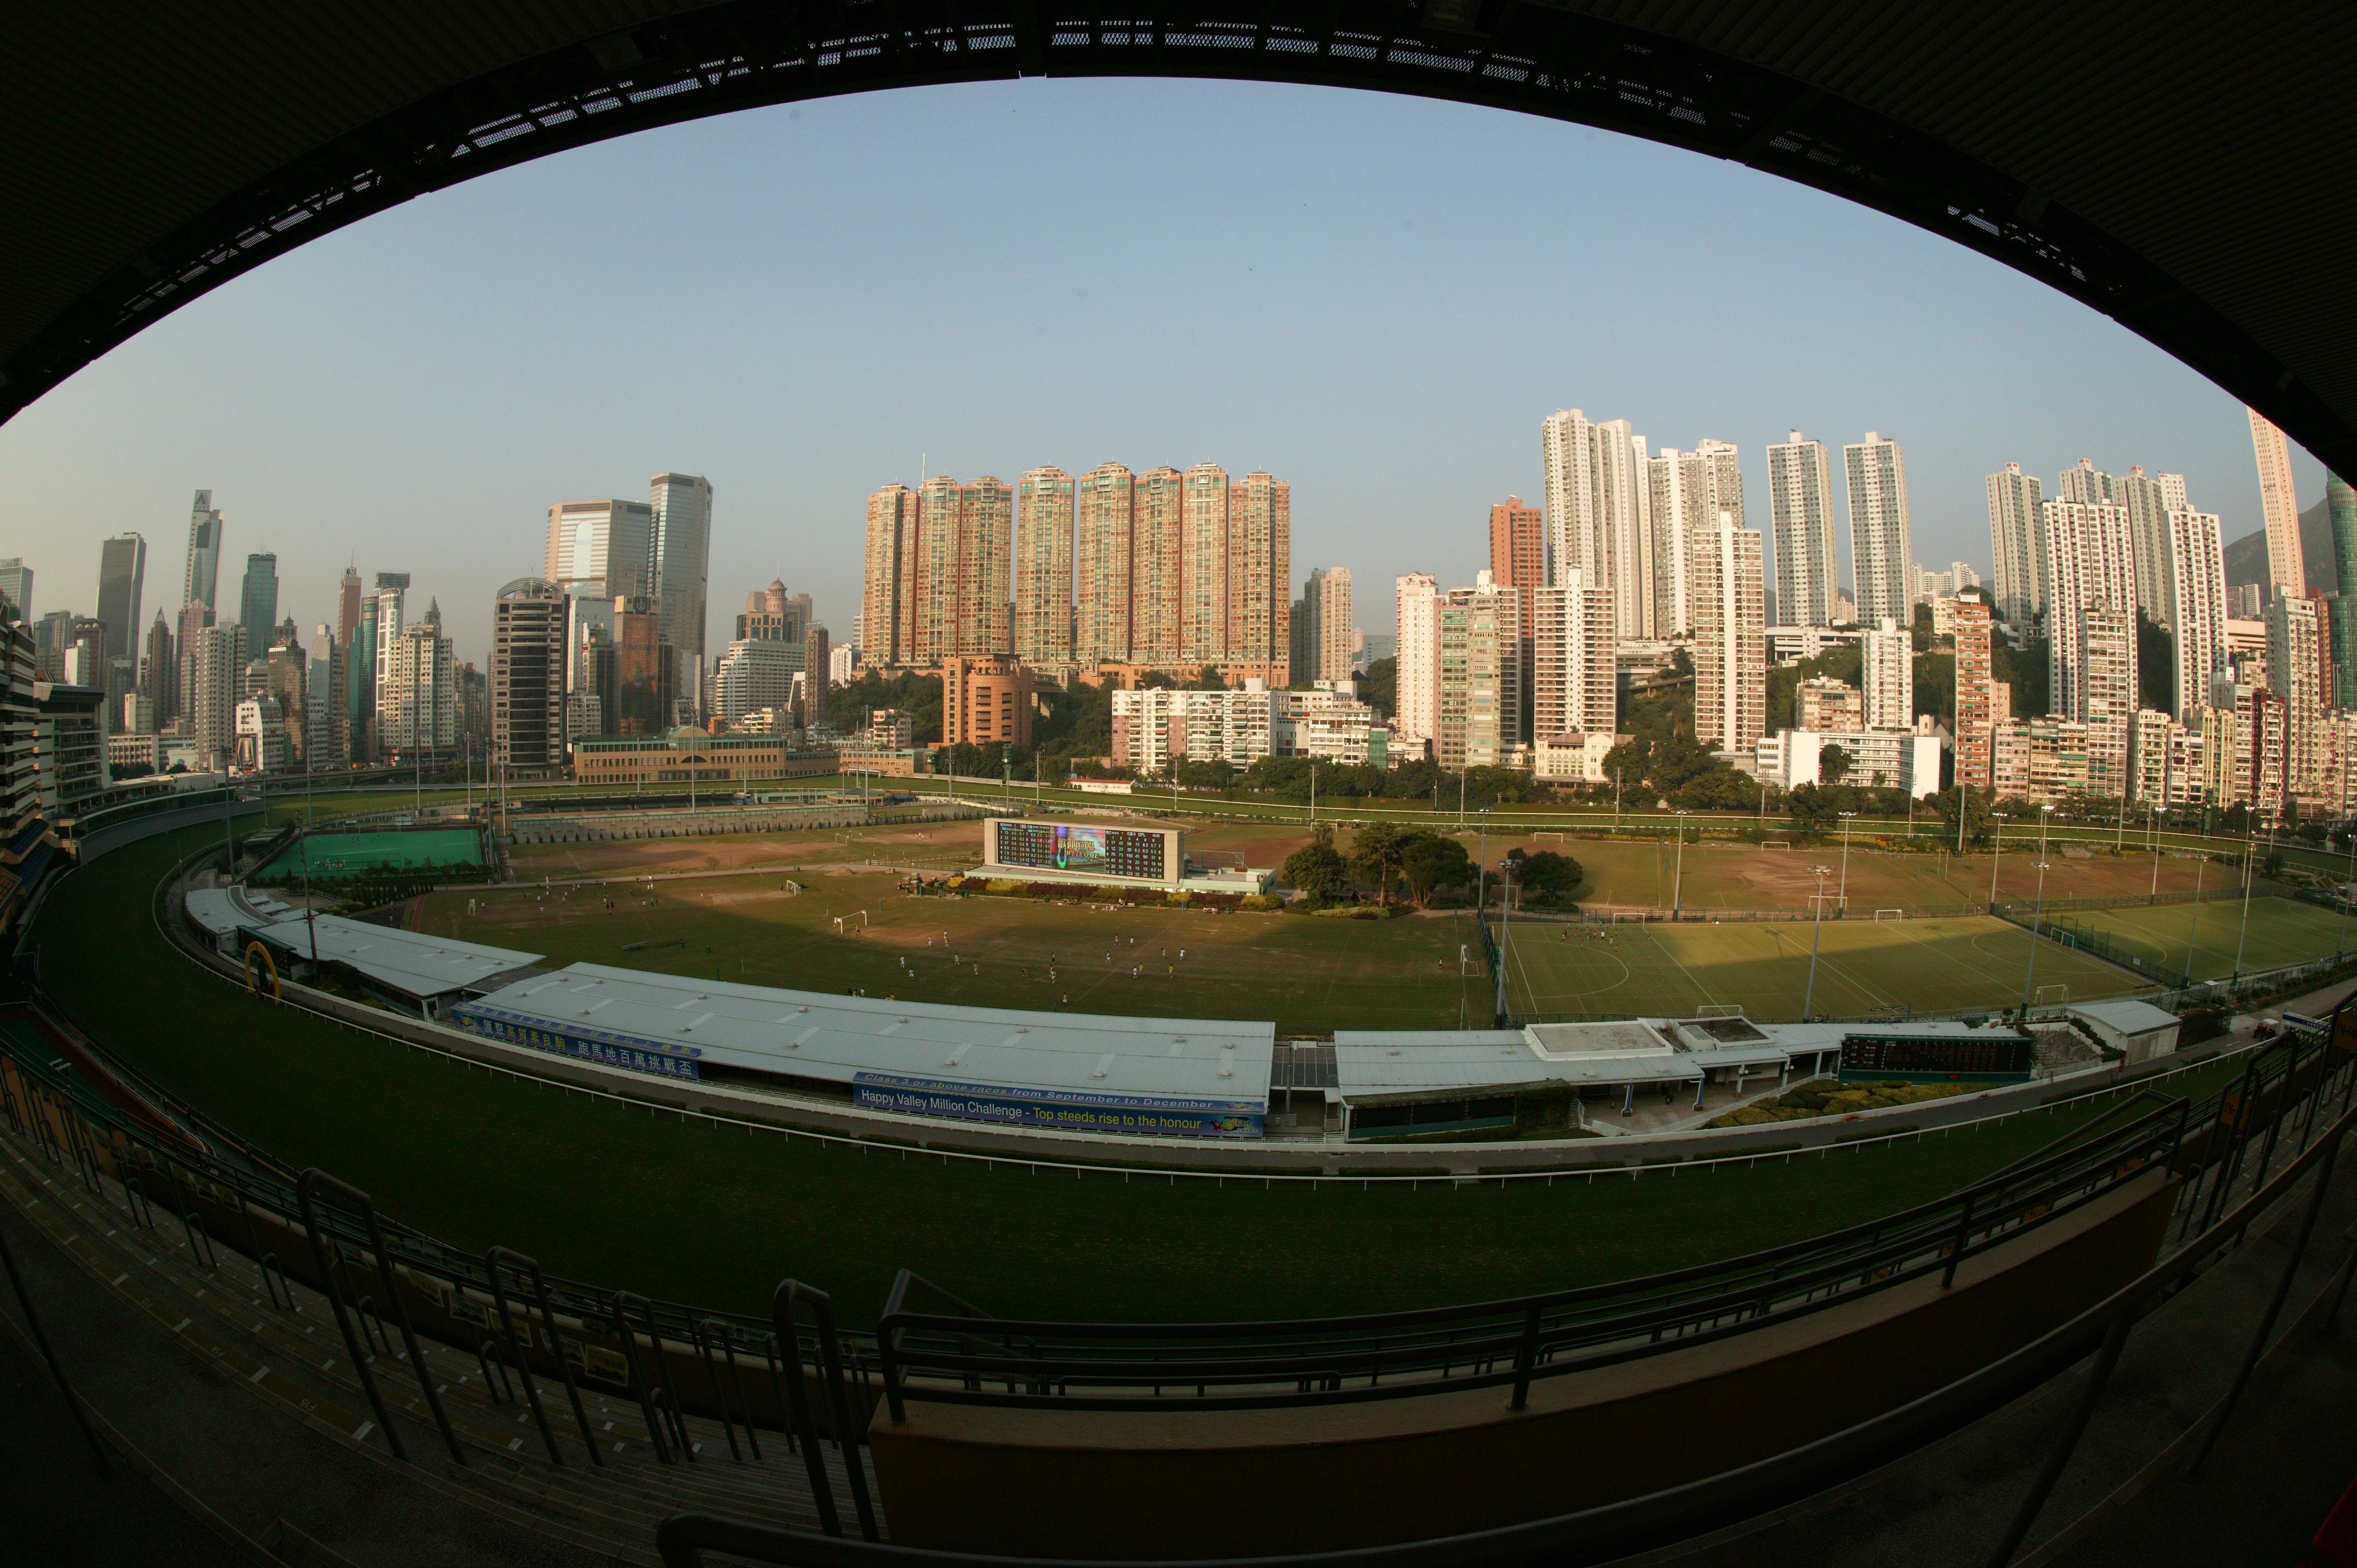 Happy Valley offers a wide range of sporting pursuits within its confines, in addition to horse racing.